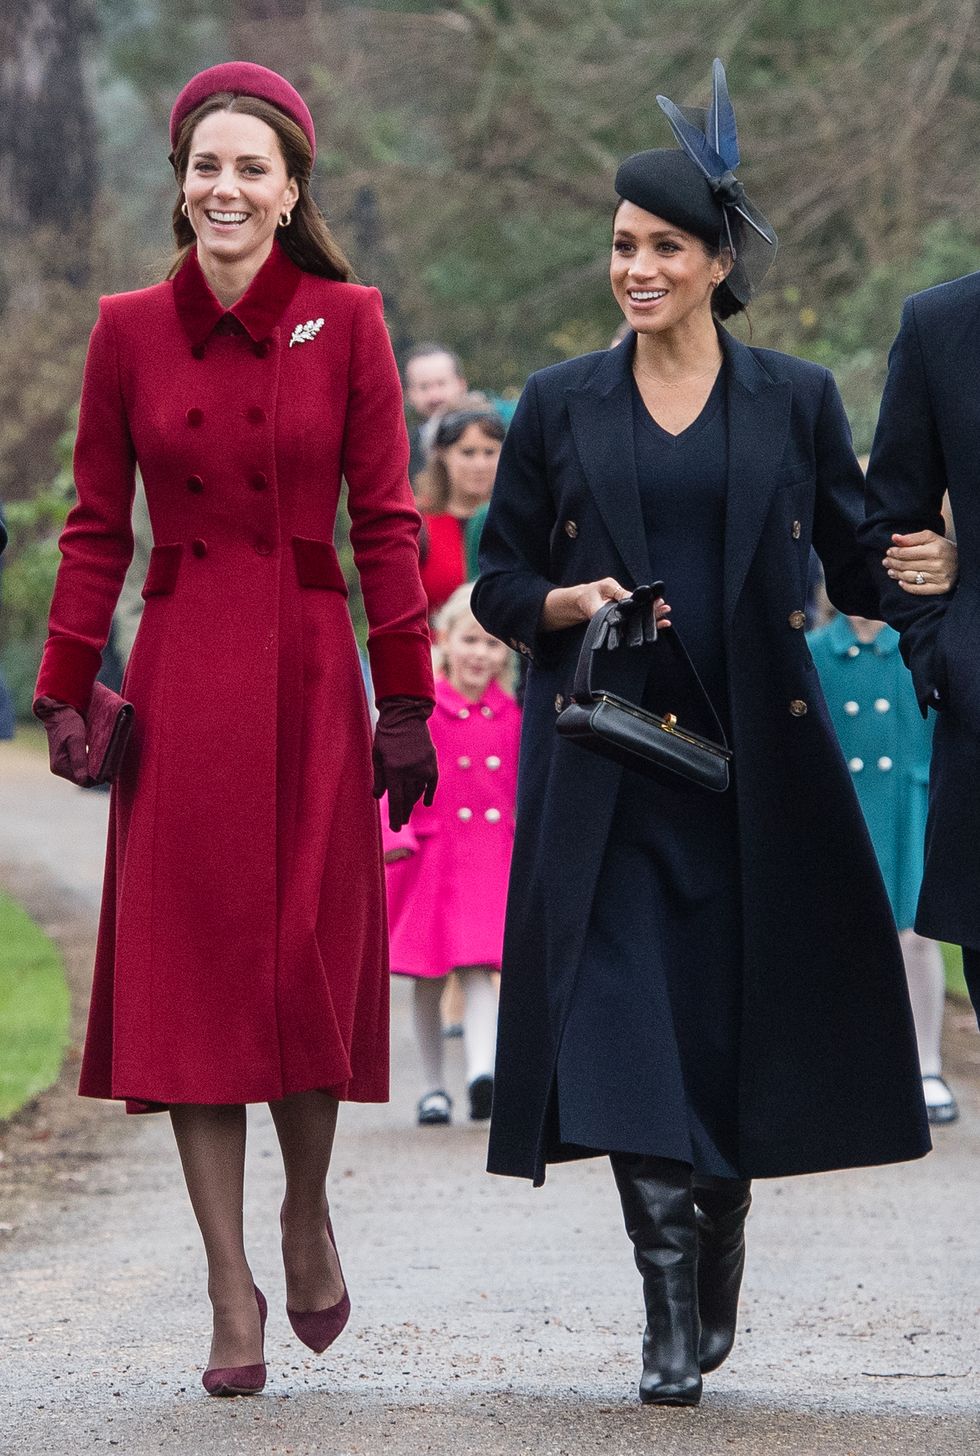 kings lynn, england december 25 catherine, duchess of cambridge and meghan, duchess of sussex attend christmas day church service at church of st mary magdalene on the sandringham estate on december 25, 2018 in kings lynn, england photo by samir husseinsamir husseinwireimage